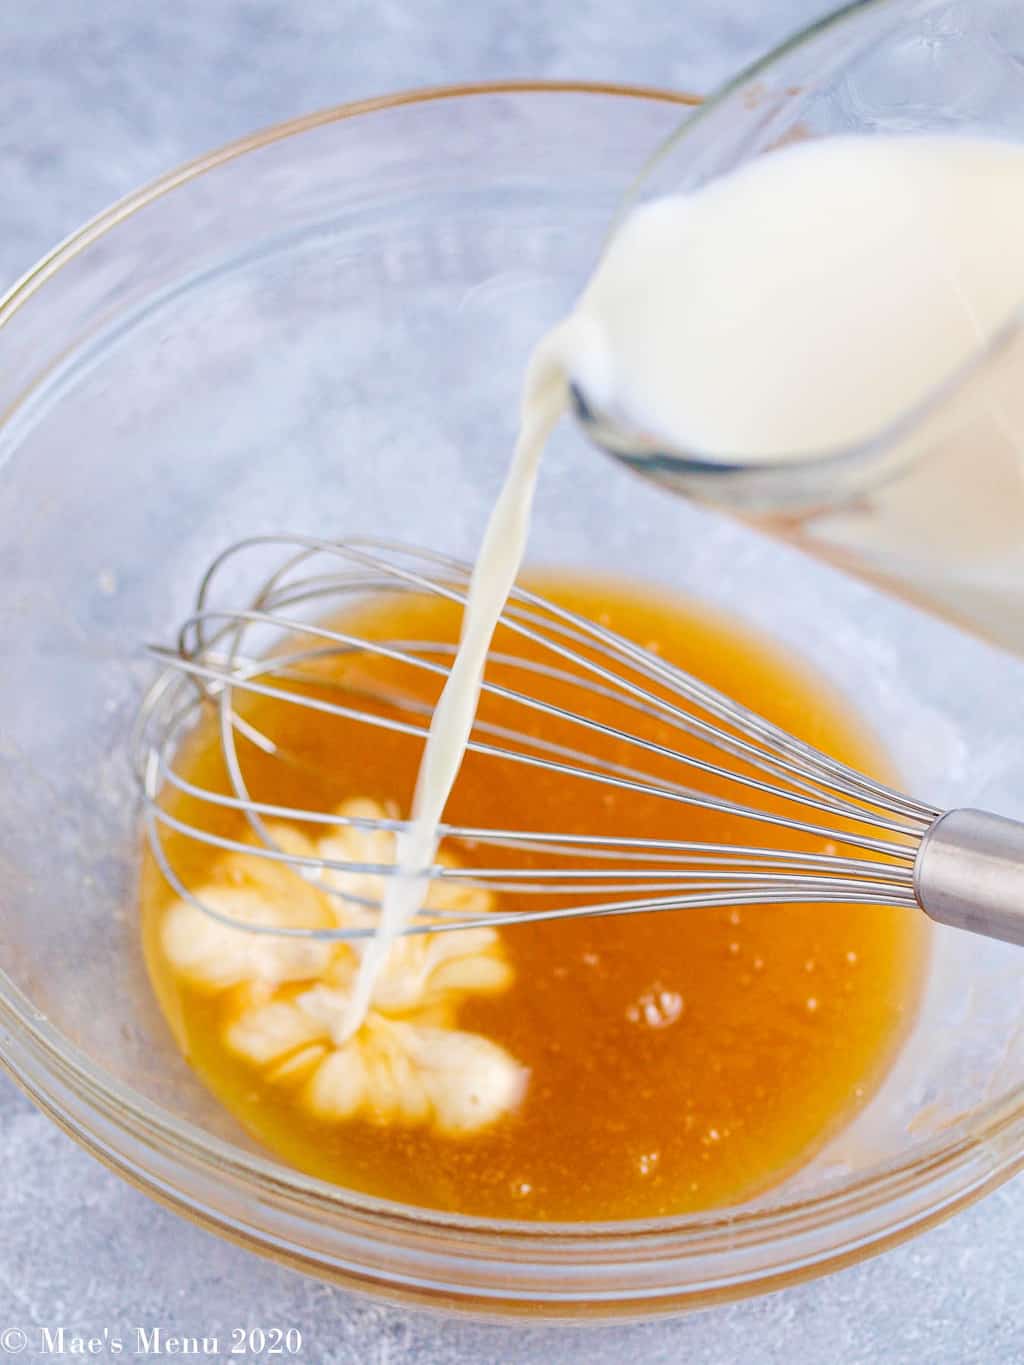 Pouring milk into the melted butter and honey